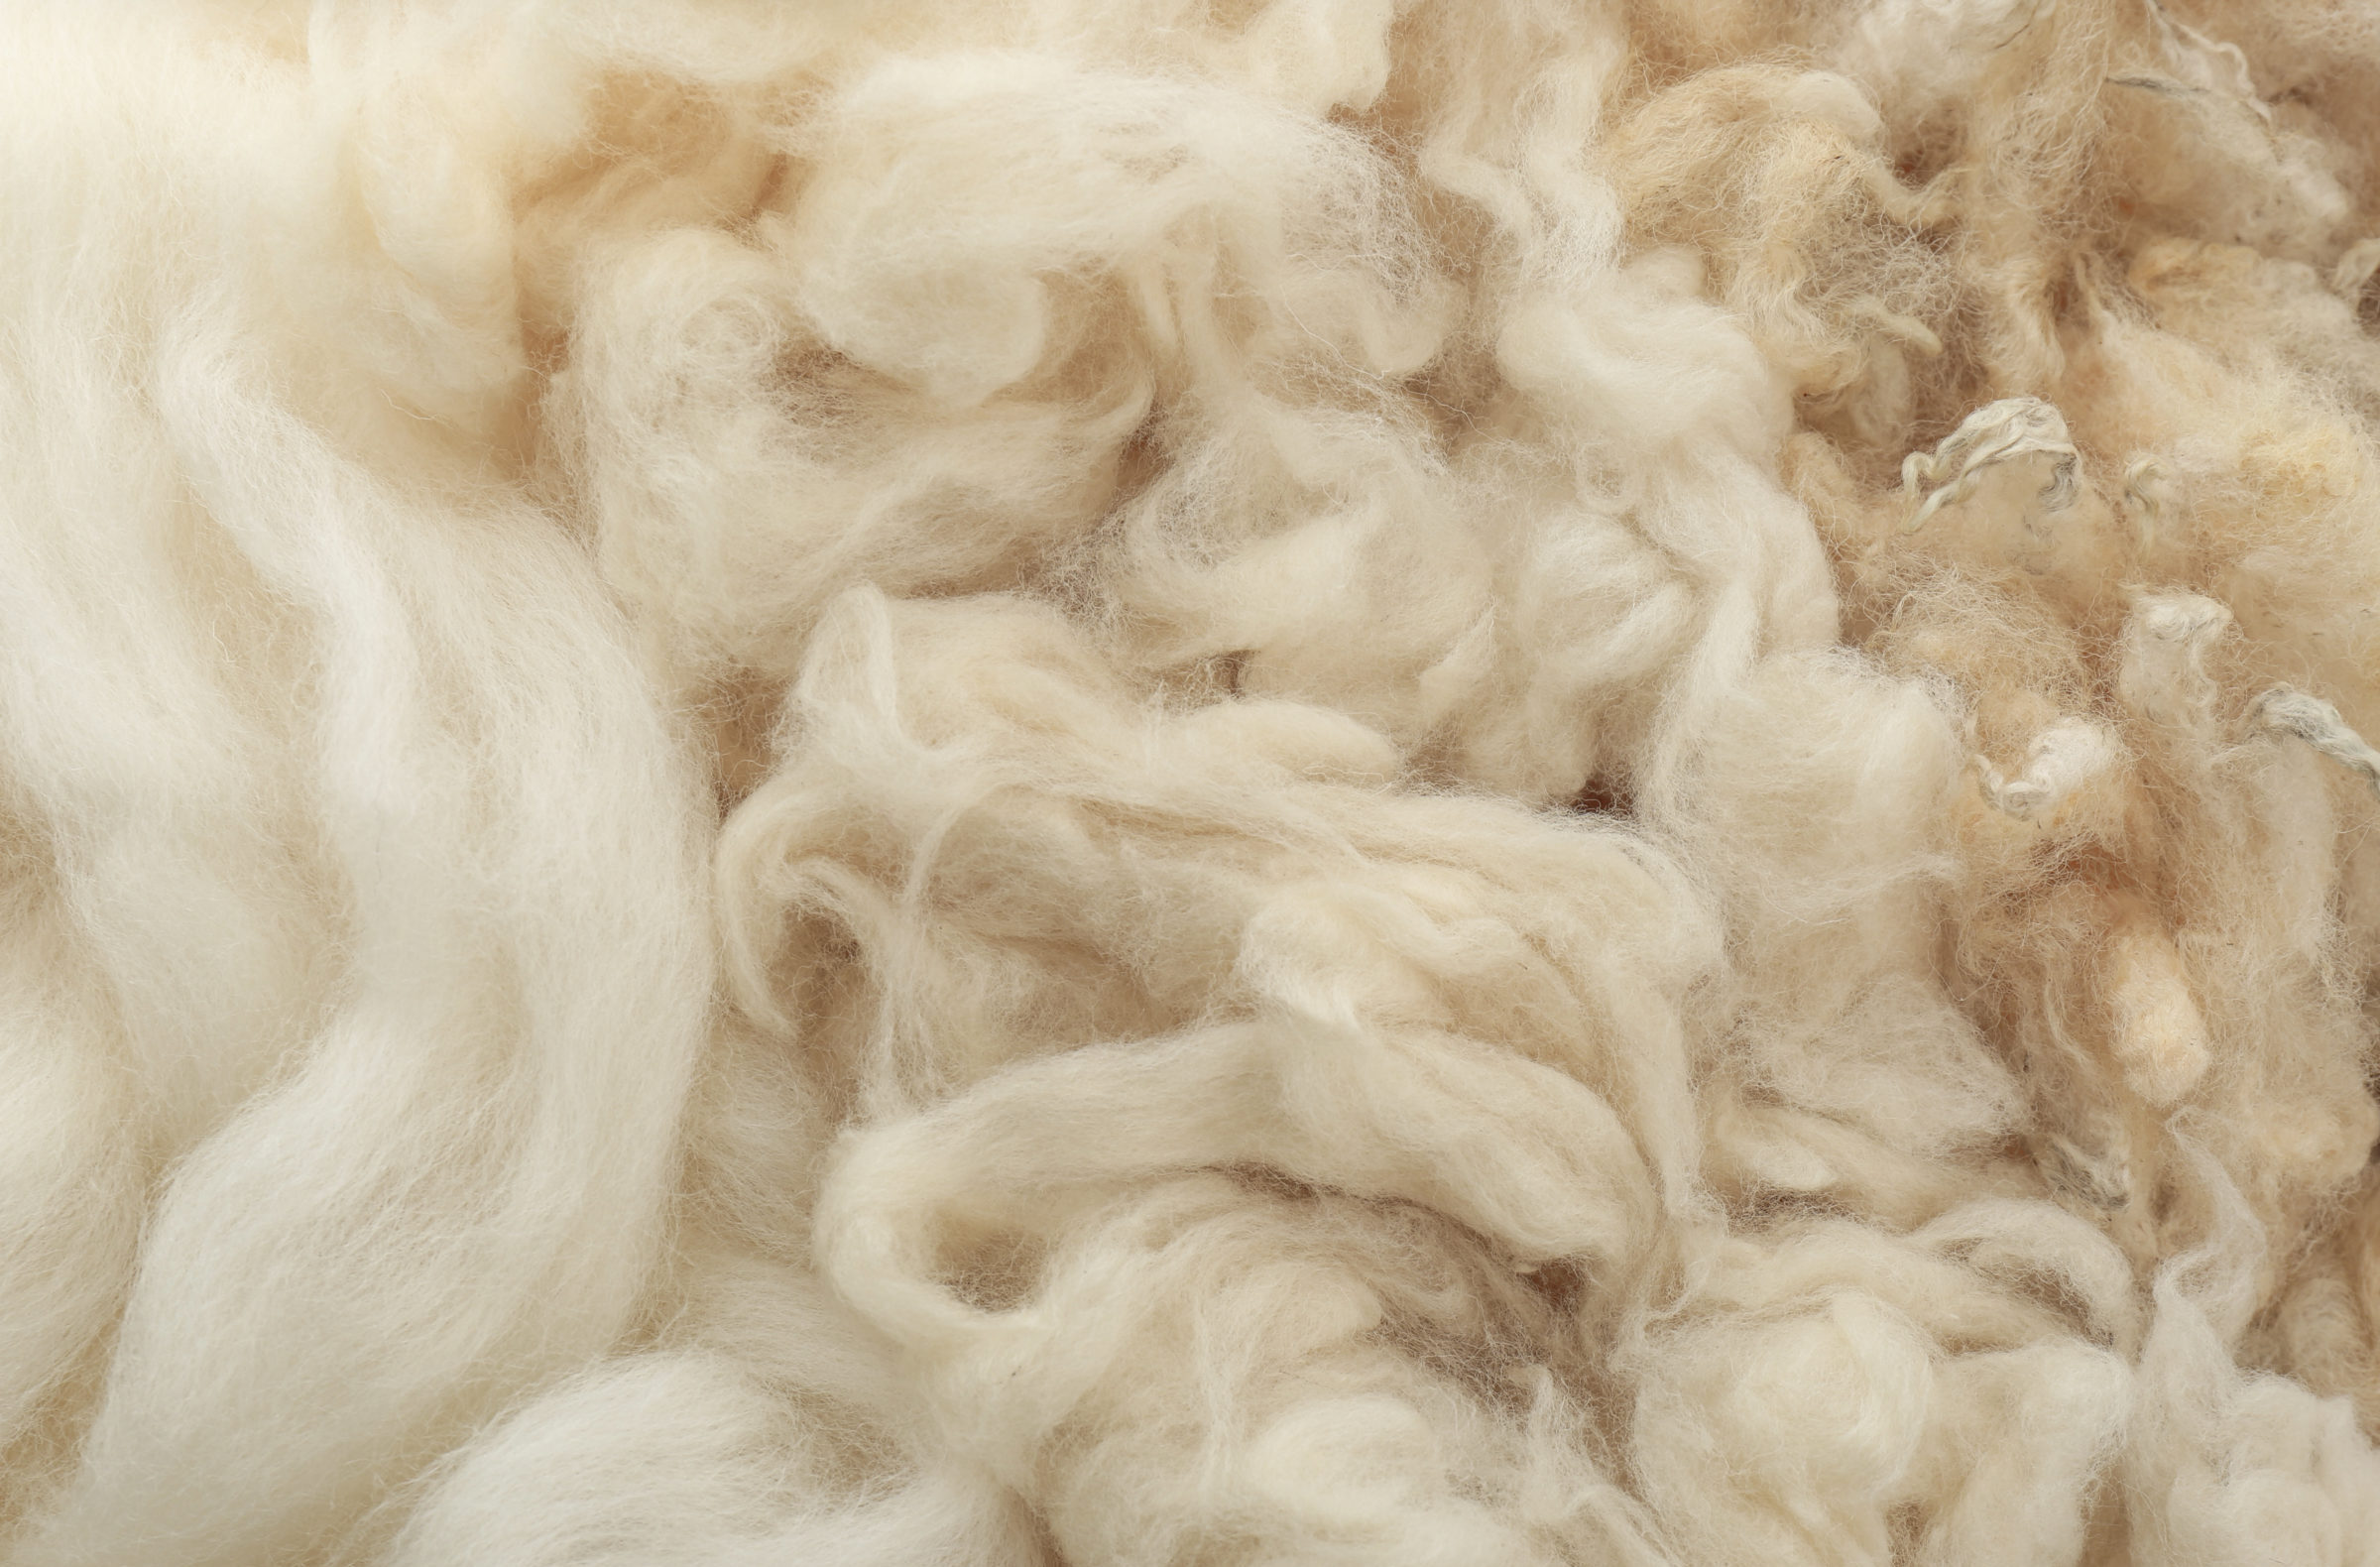 Employing the strength of natural fibres